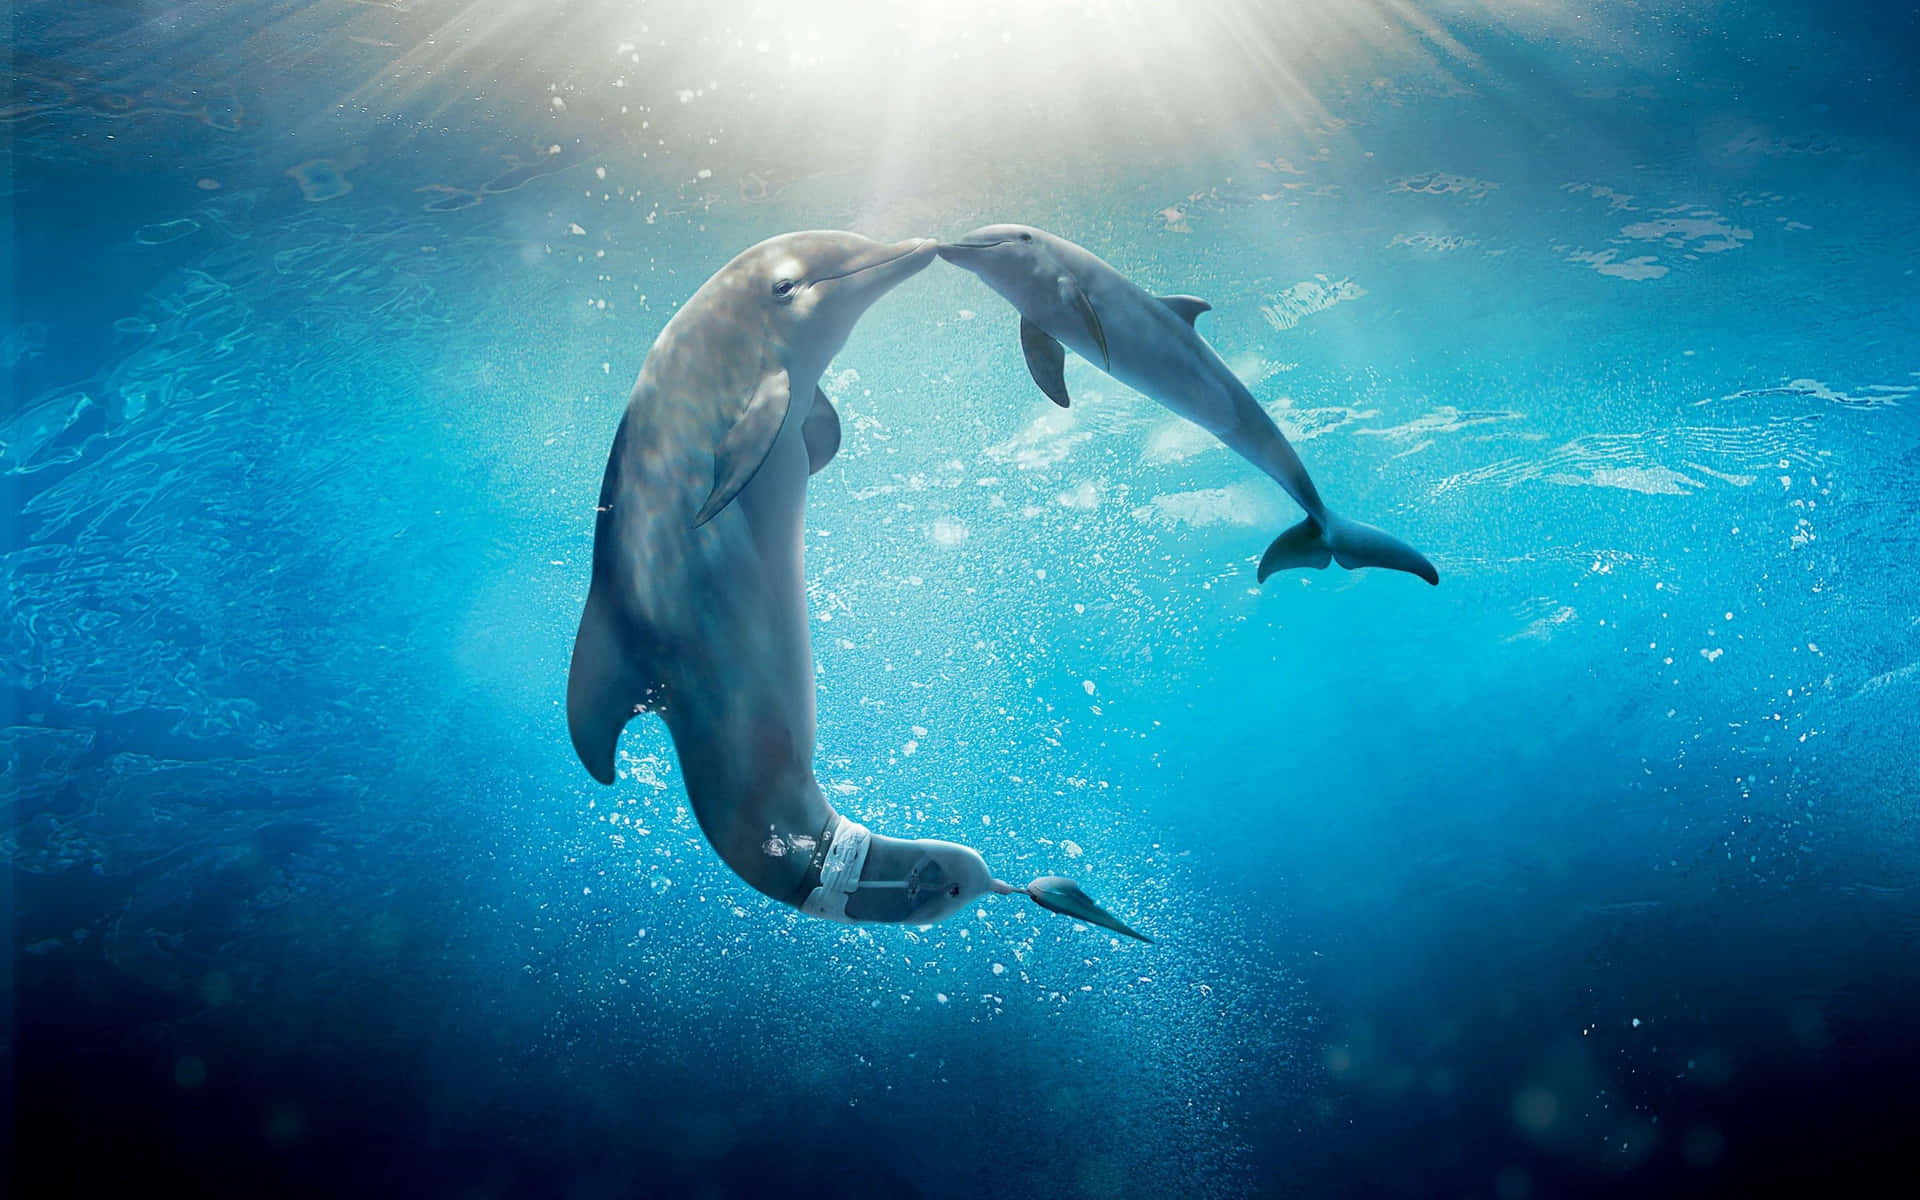 A cool dolphin gracefully swimming in the night sky. Wallpaper